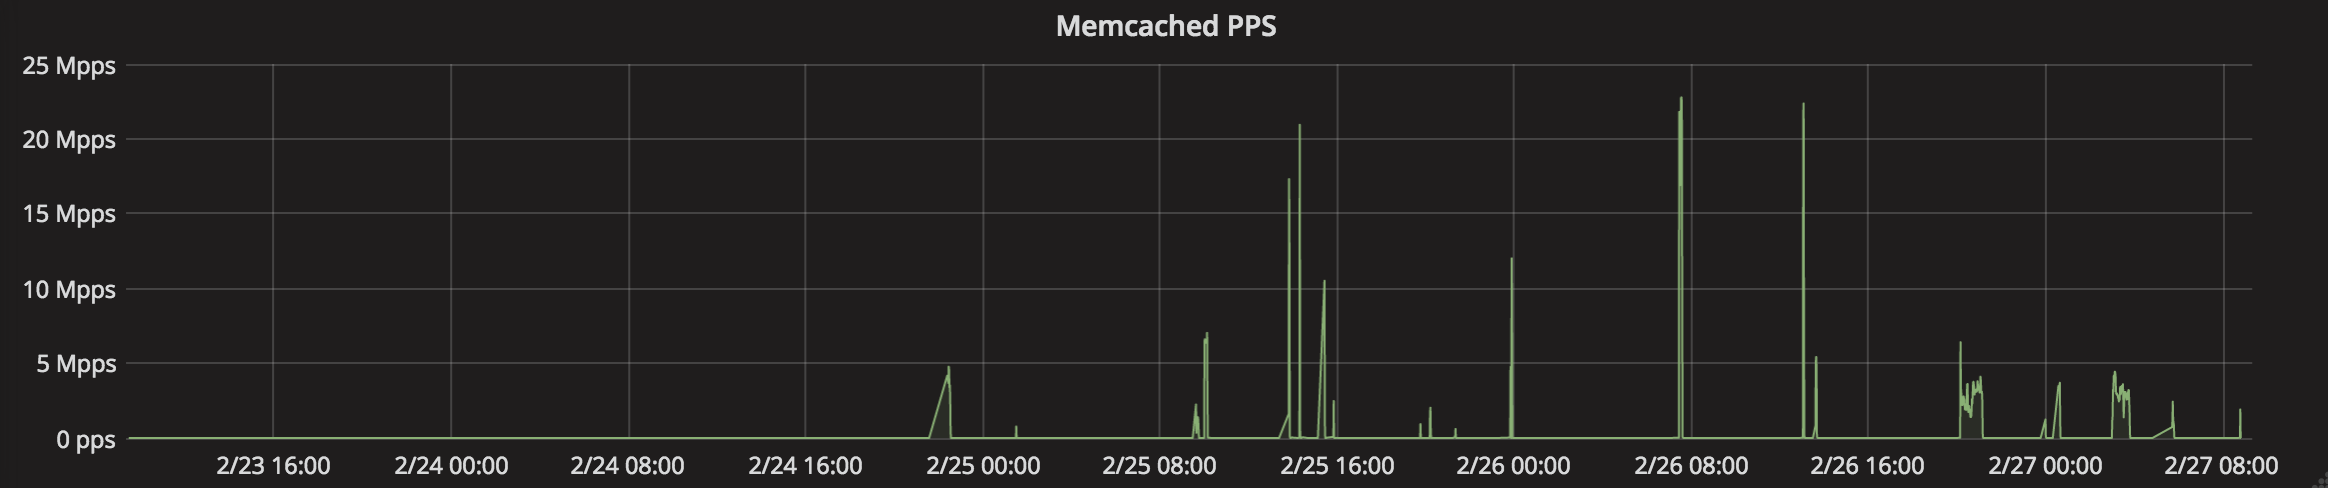 memcached-pps